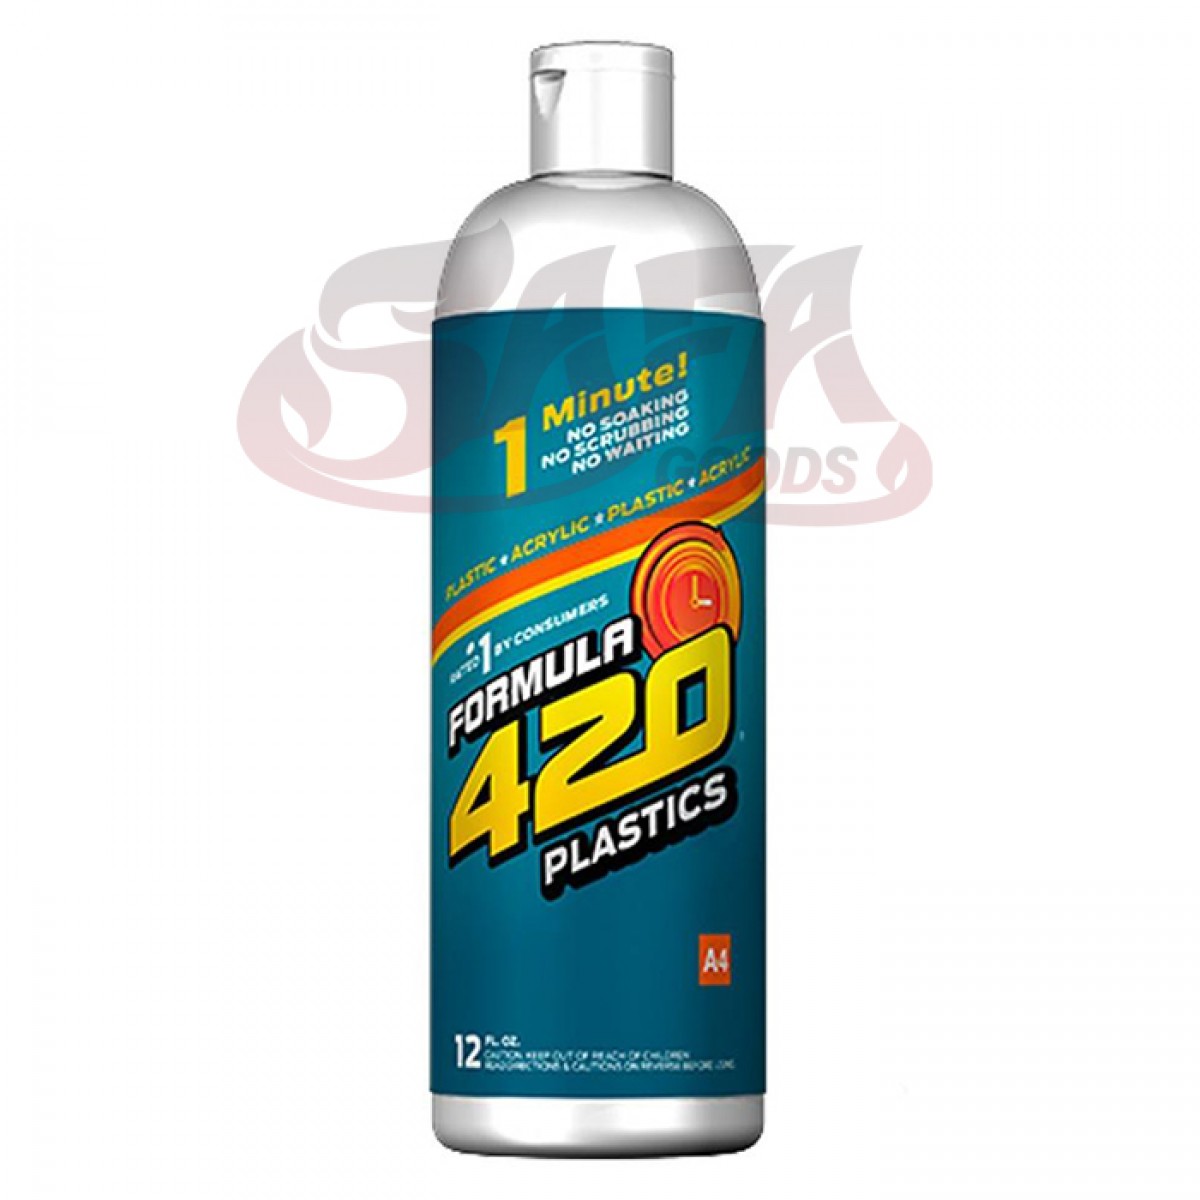 Formula 420 Plastic and Acrylic Pipe Cleaner 12oz